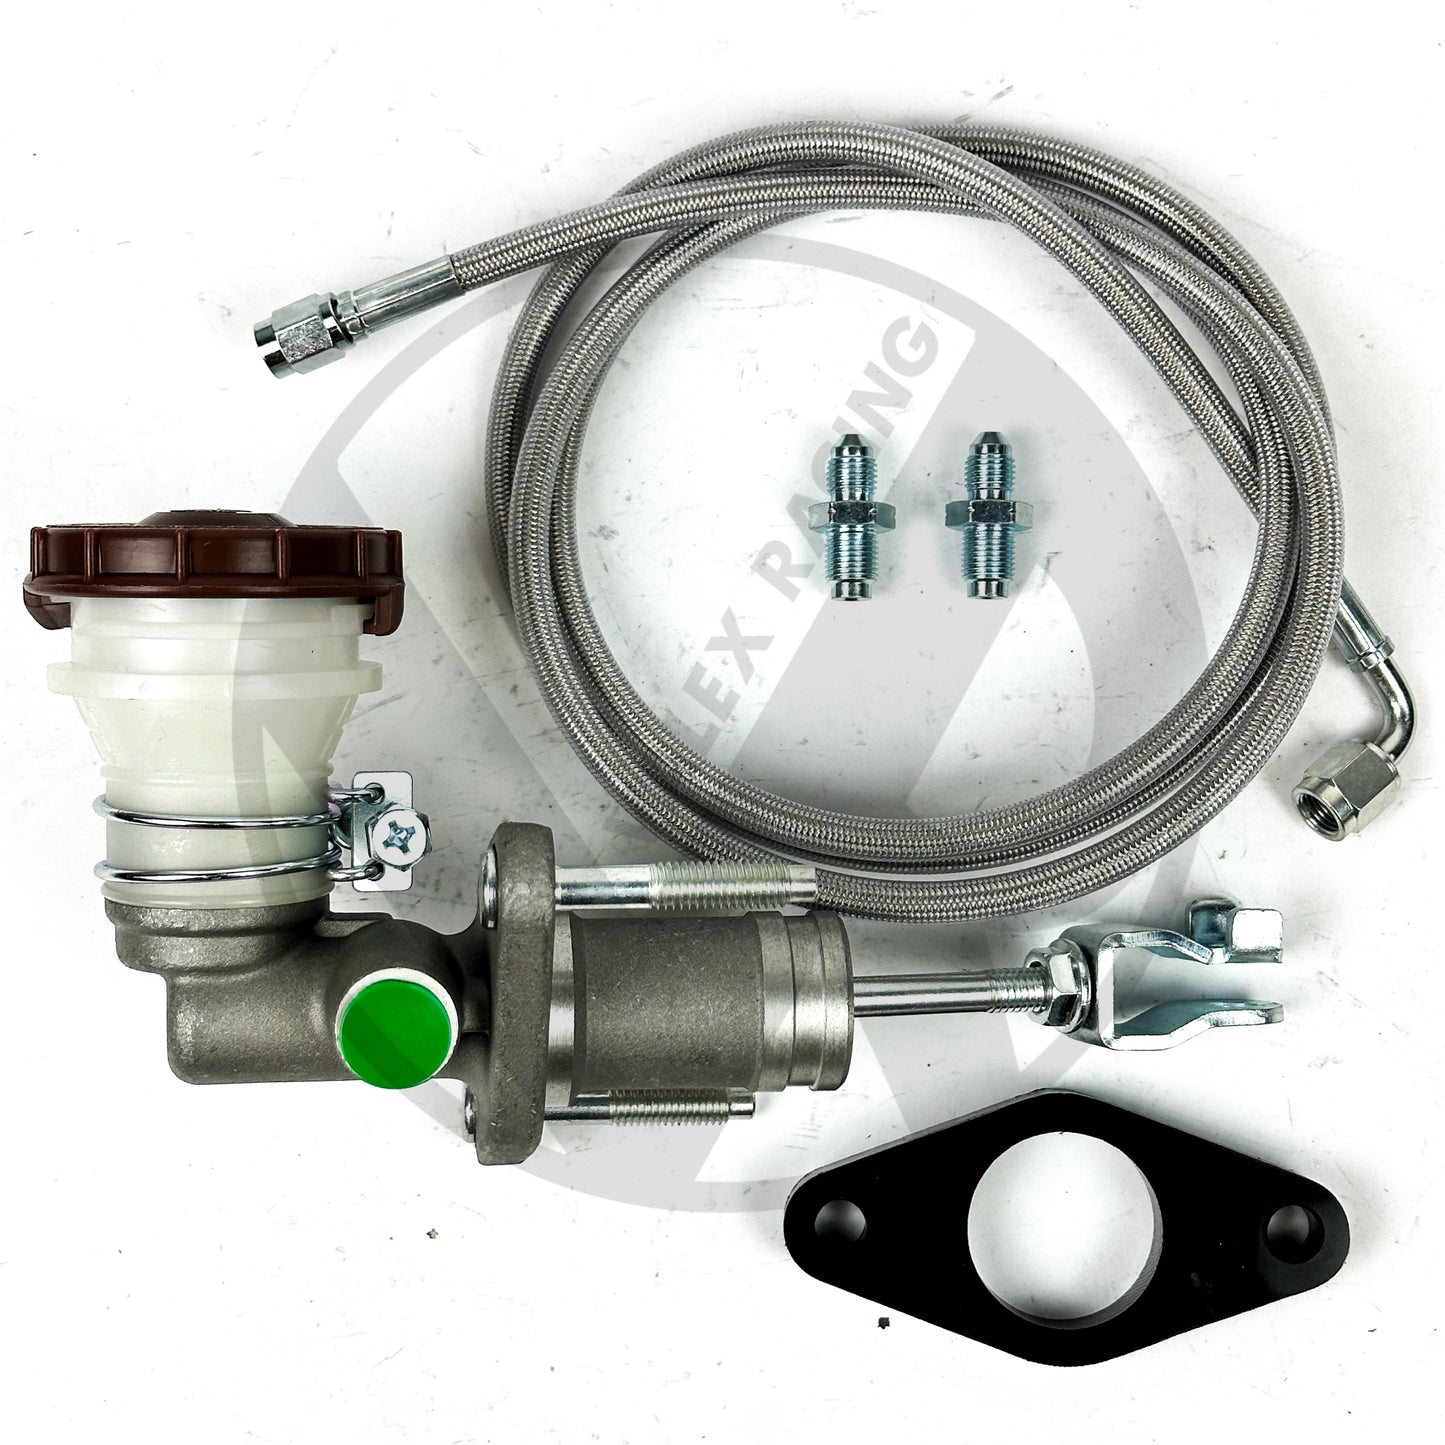 S2000 (S2K) Clutch Master Cylinder (CMC) Kit with Adapter and Stainless Steel Clutch Line Accord Prelude